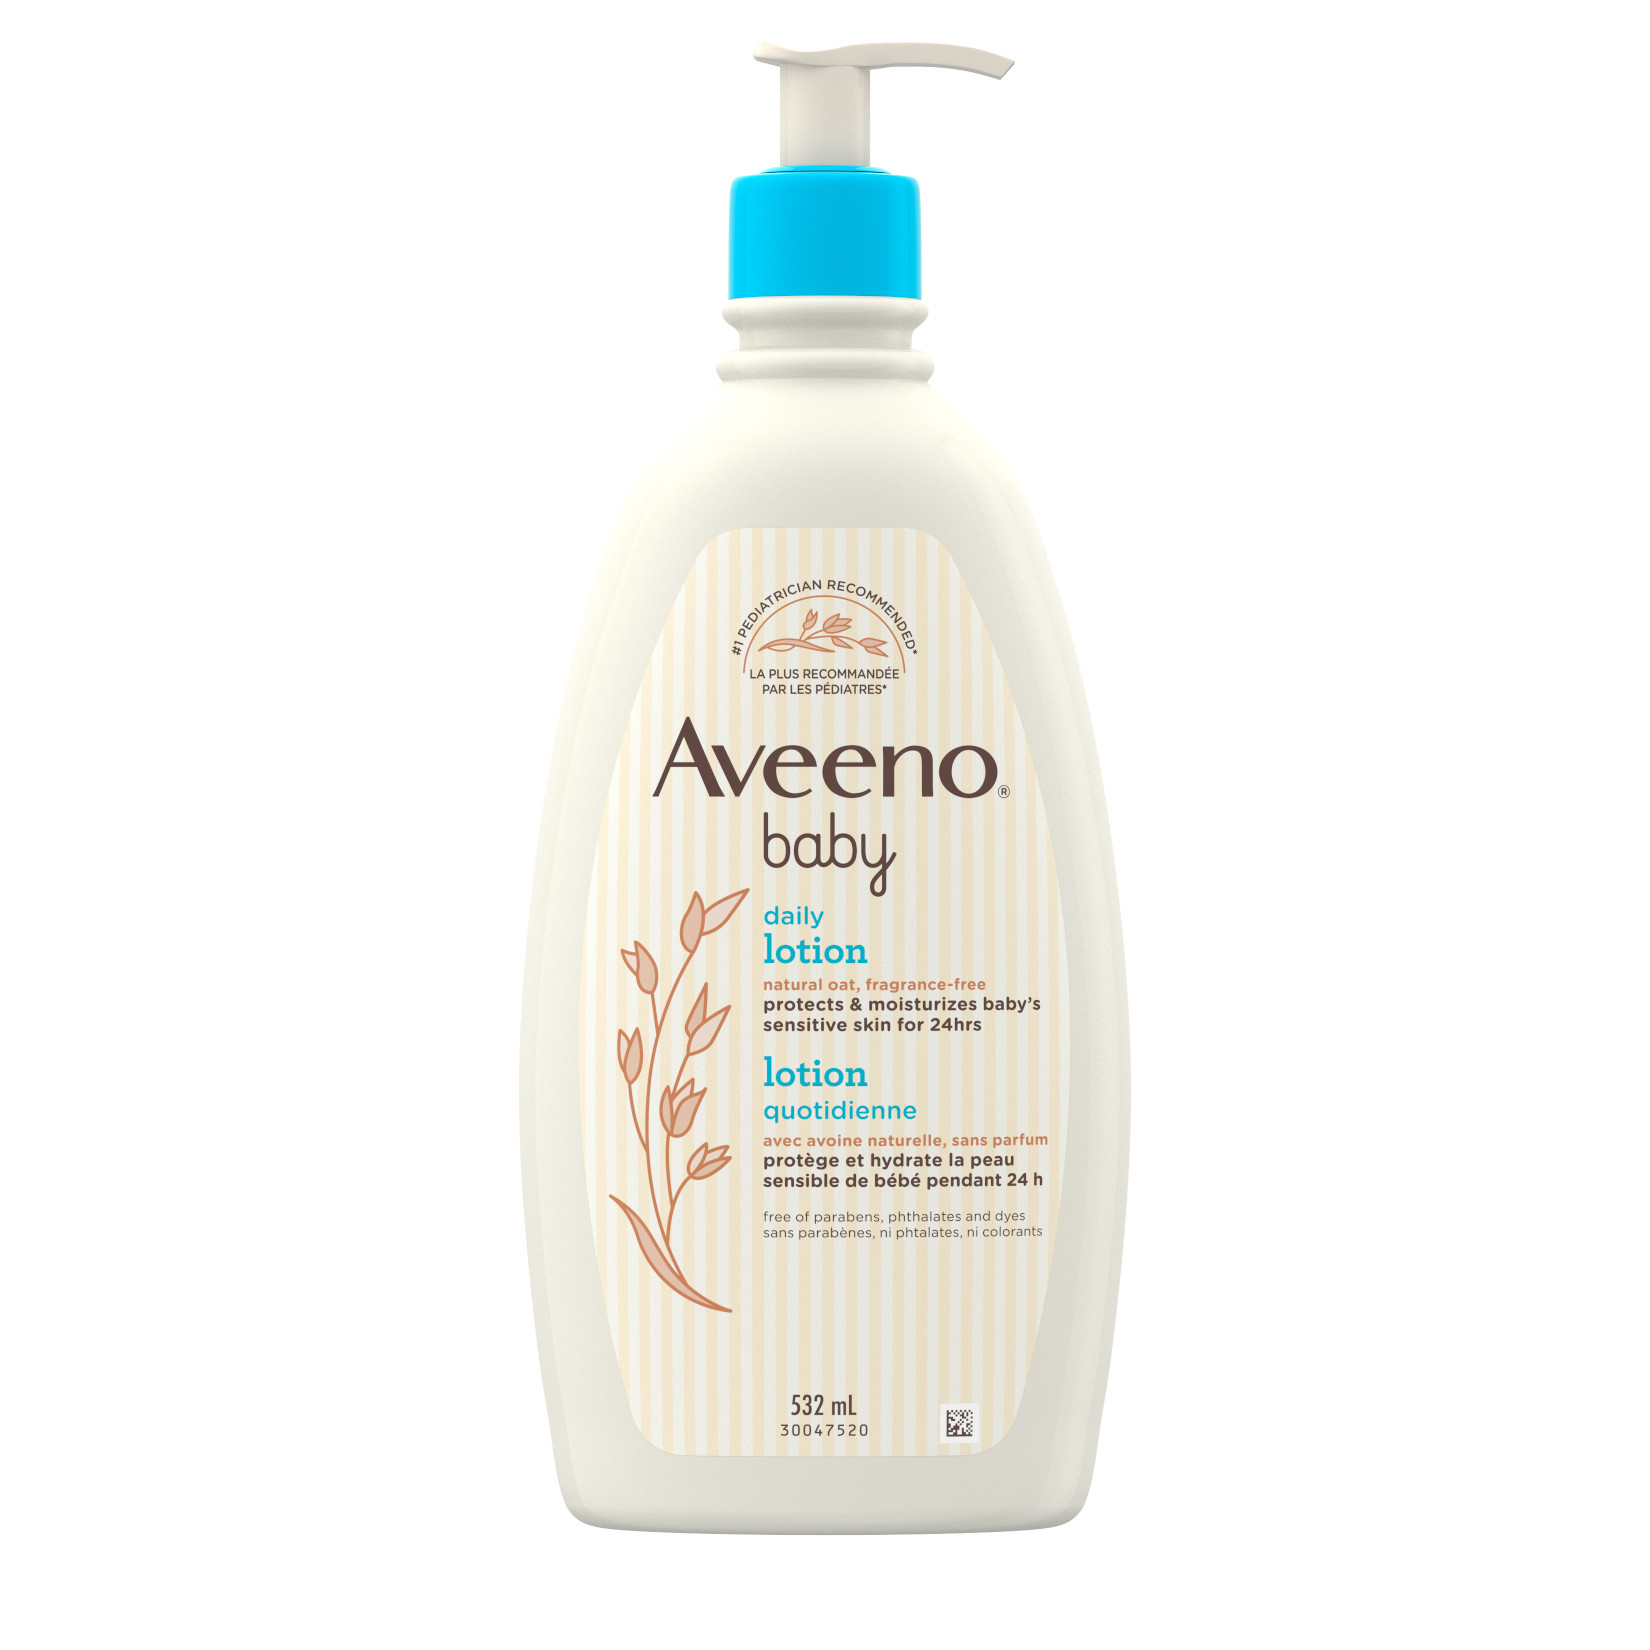 532ml bottle of Aveeno Baby Daily Lotion 